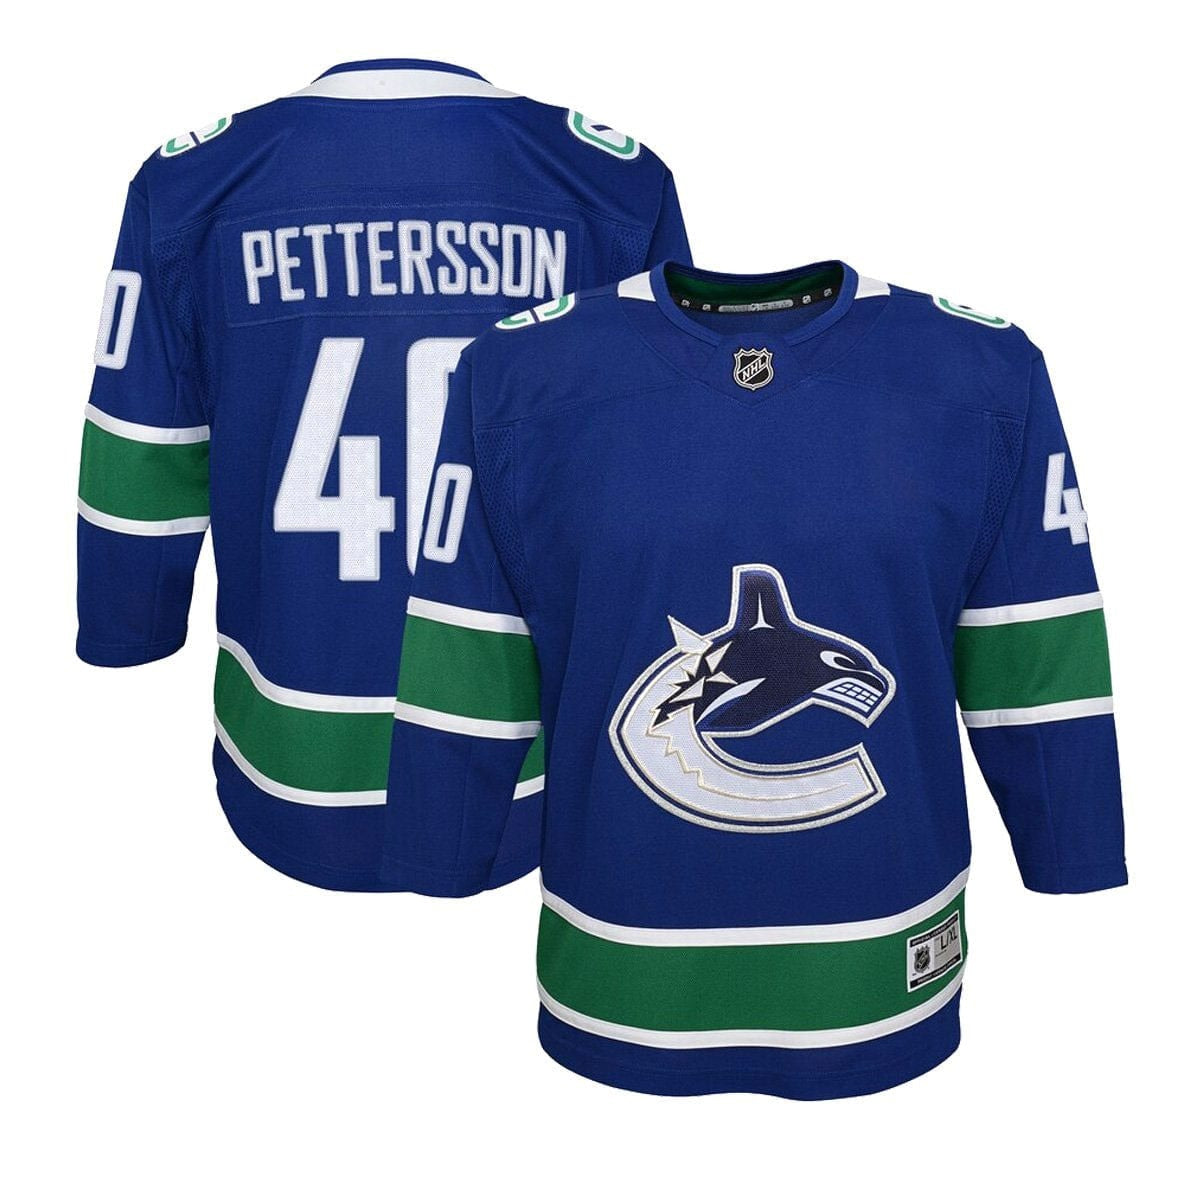 OUTERSTUFF Youth Vancouver Canucks Premier Jersey